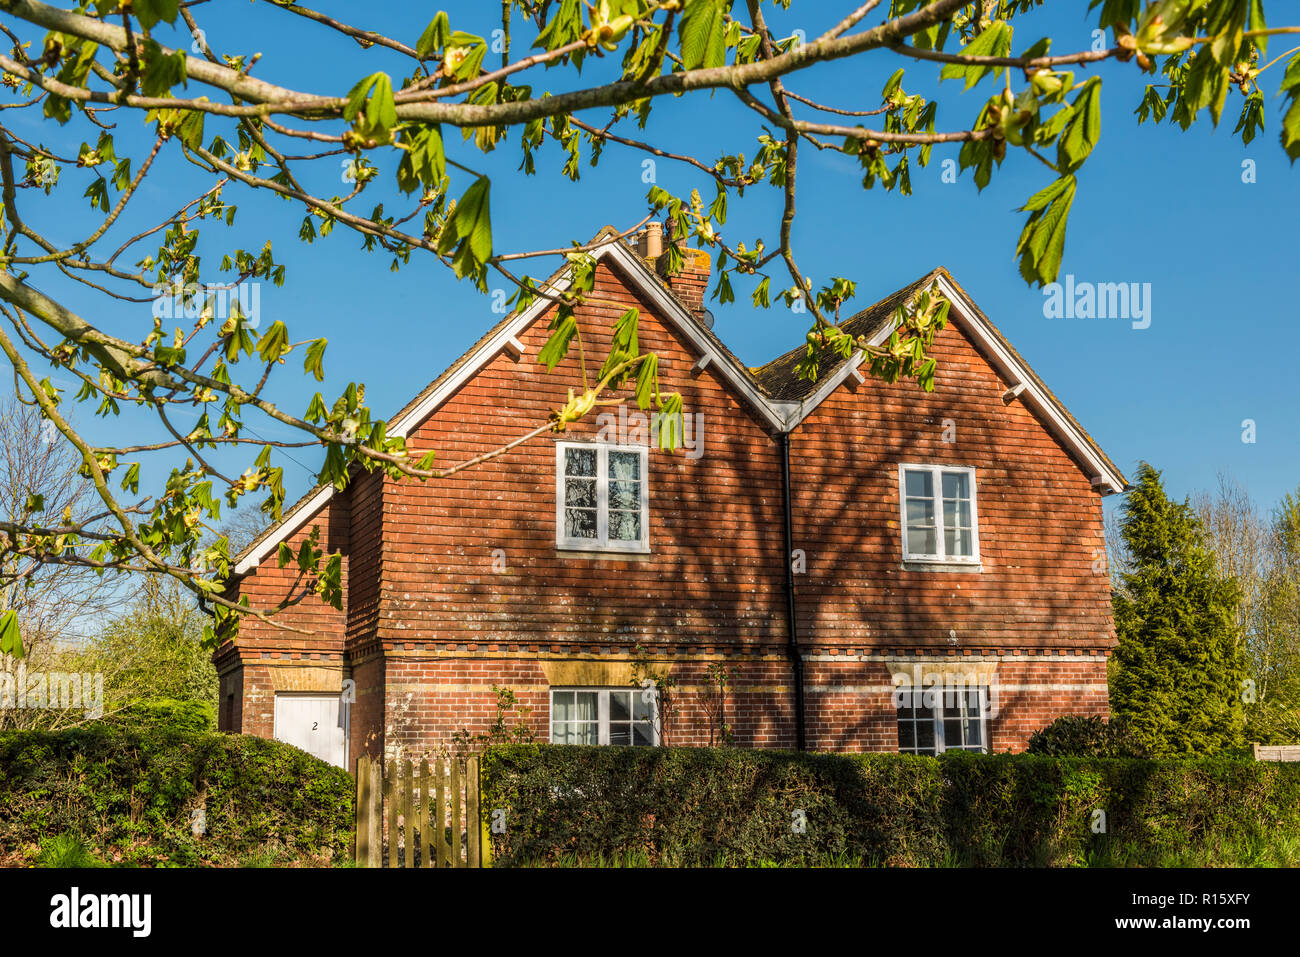 A pretty house in Bodiam village, East Sussex, England Stock Photo